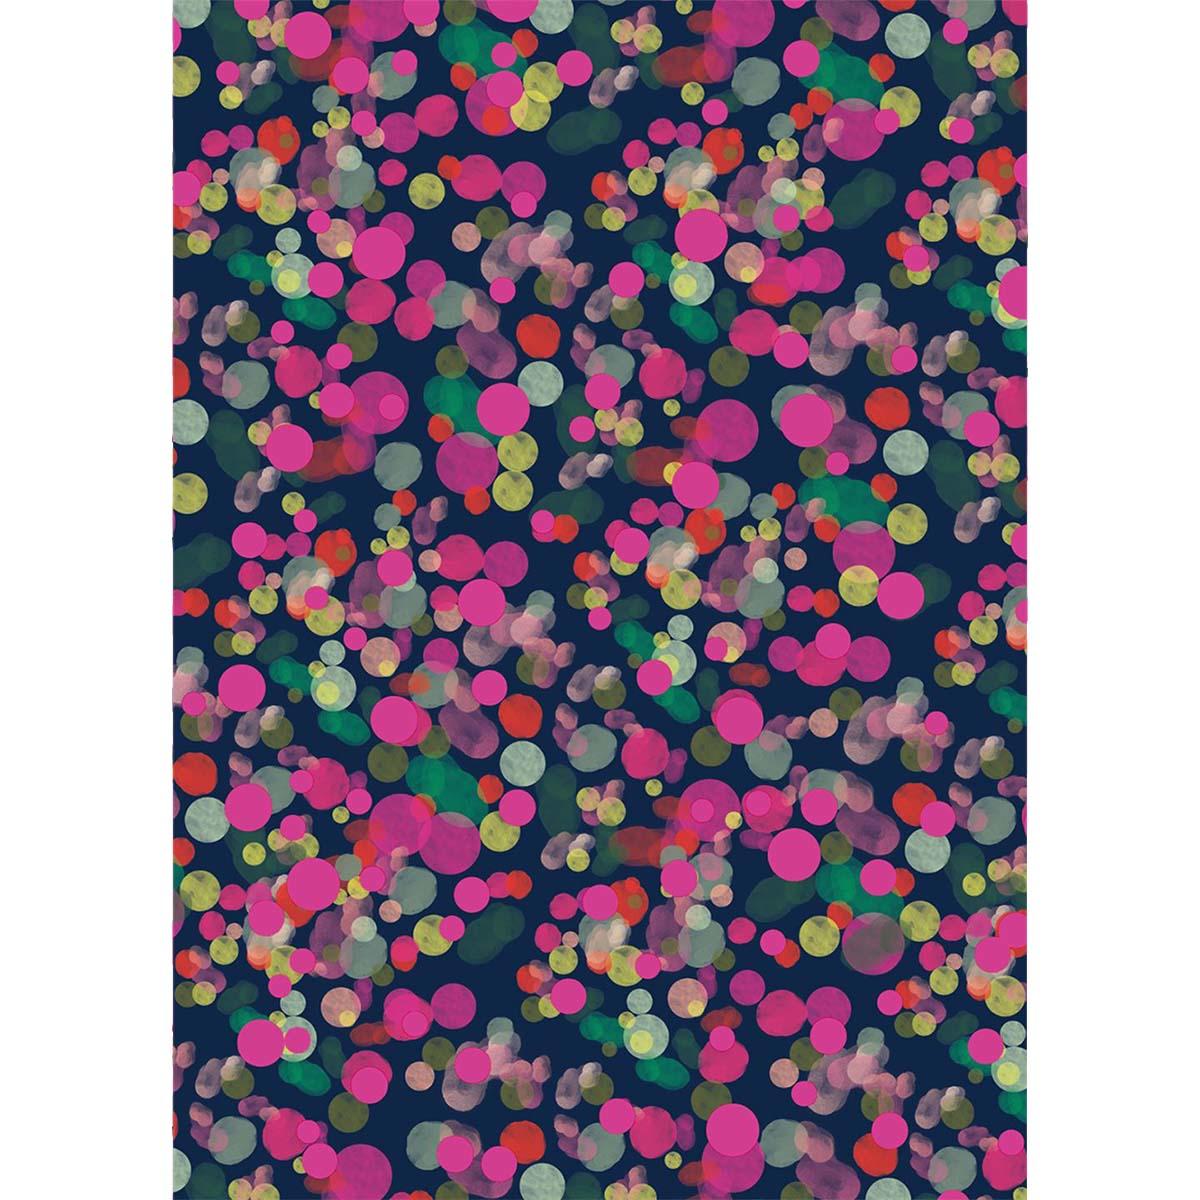 Image Showing Confetti Style Wrapping Paper